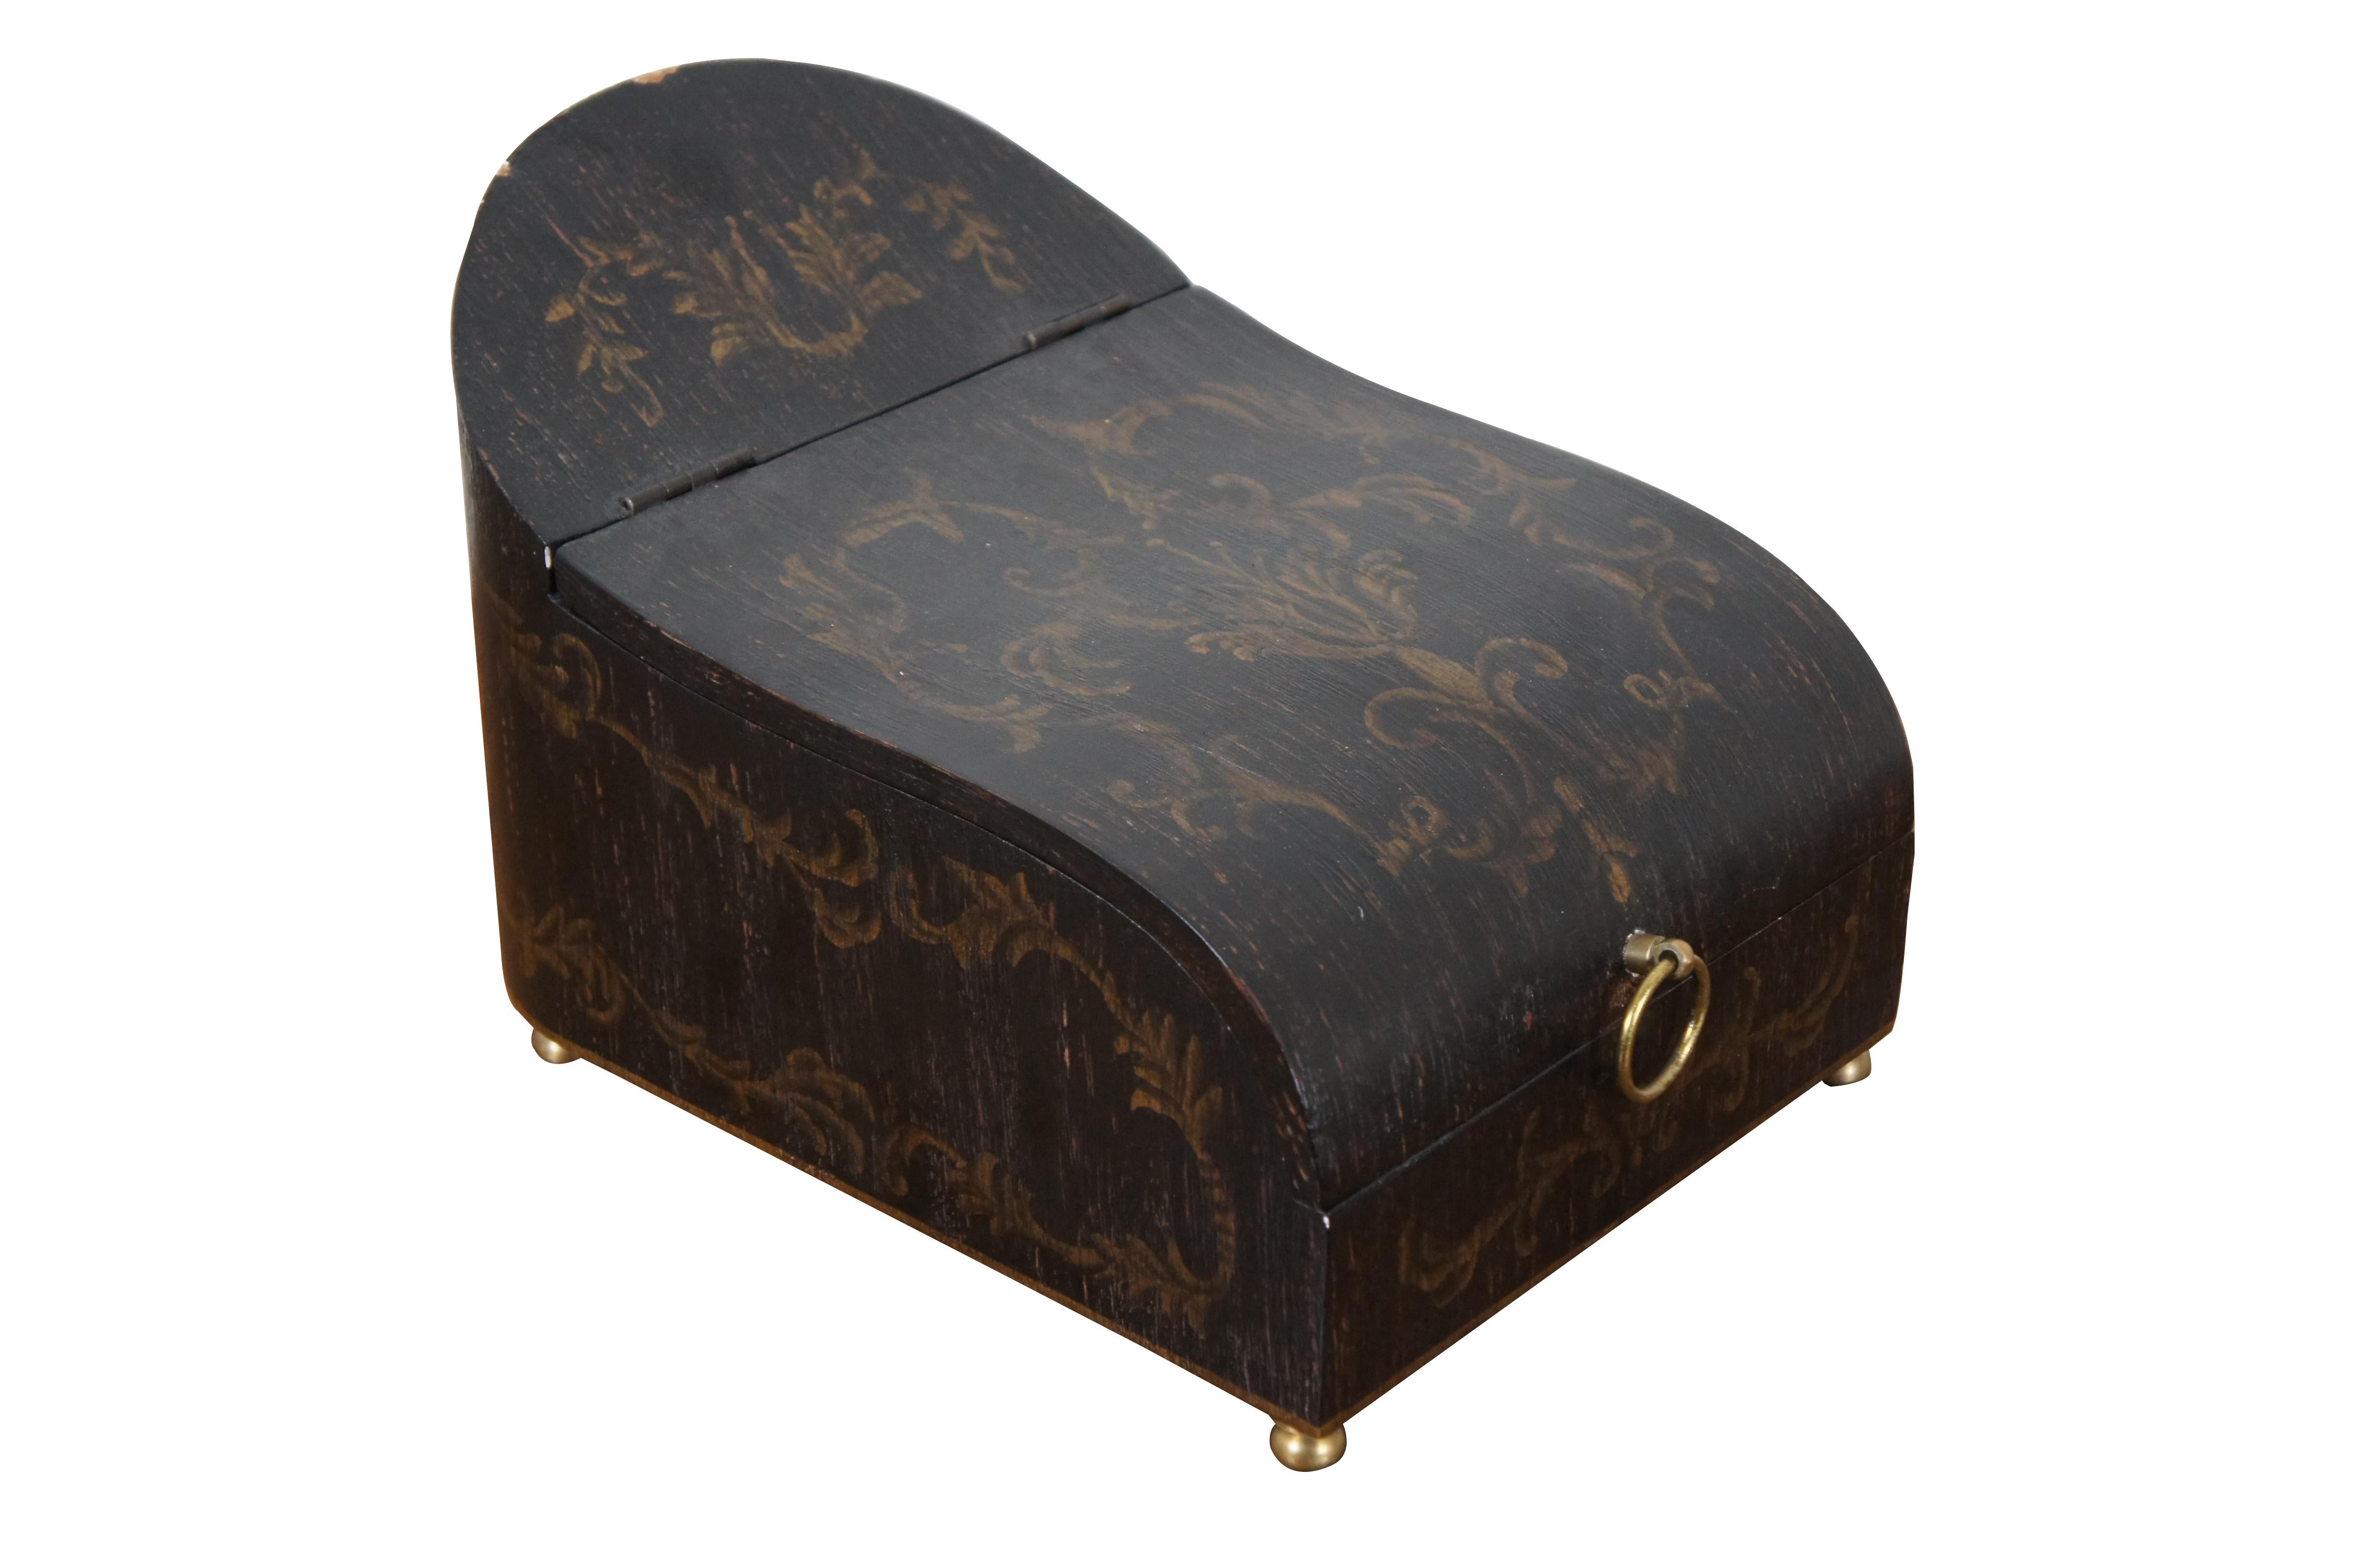 Vintage sleigh shaped wooden keepsake / stationary box painted black with golden stenciled French foliate designs, with a antiqued / distressed finish, gold bun feet, and brass ring handle at the front.

Dimensions:
8.75” x 12.25” x 8.25” (Width x